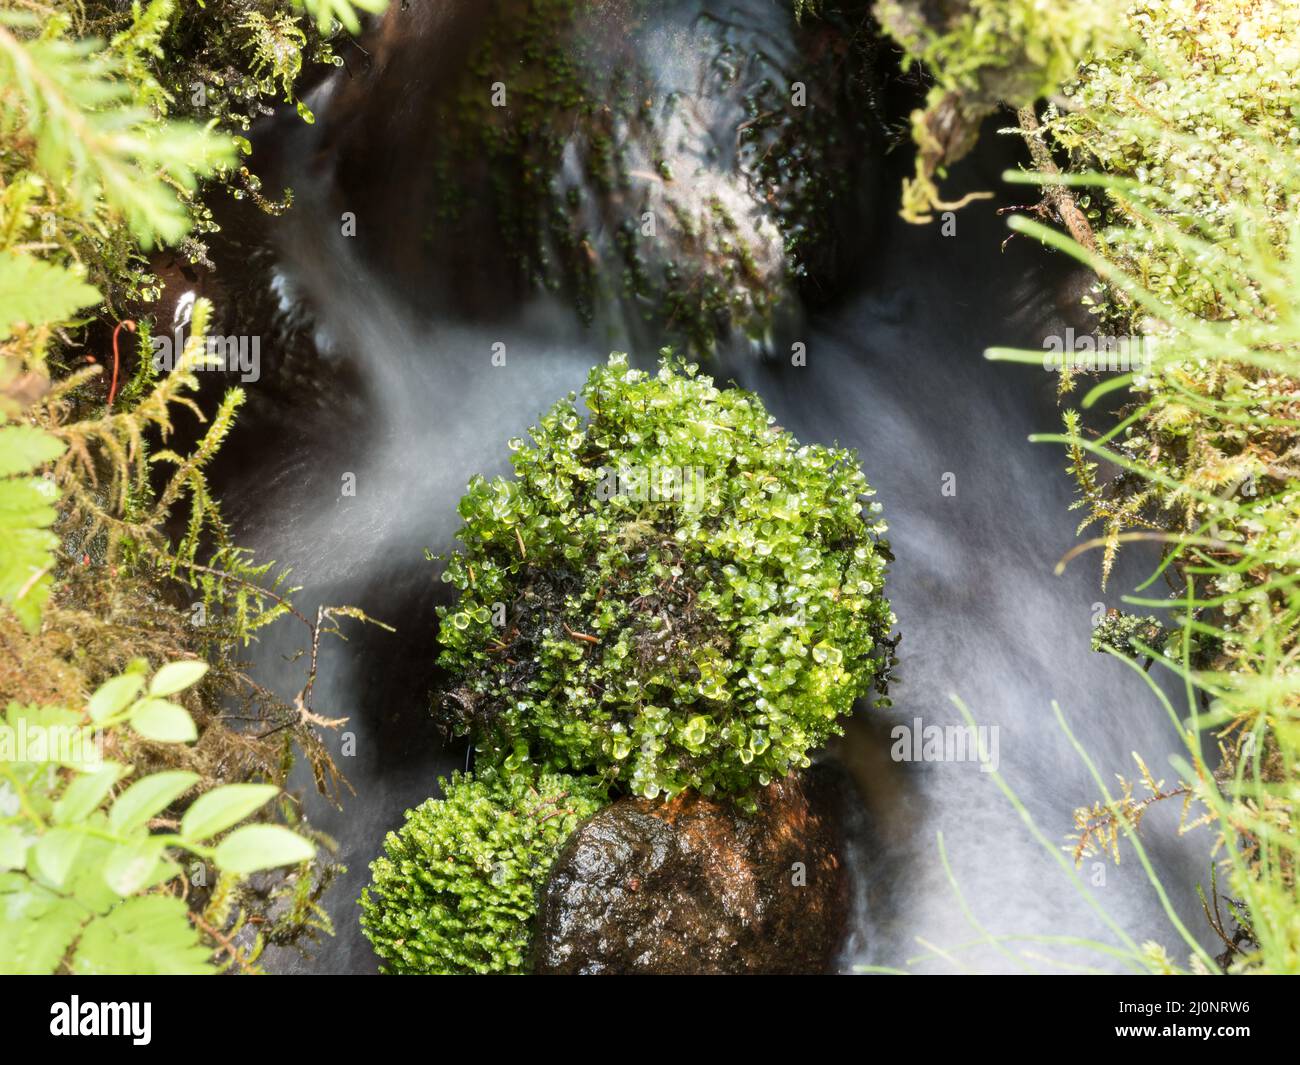 Moss on stones of spring brook Stock Photo